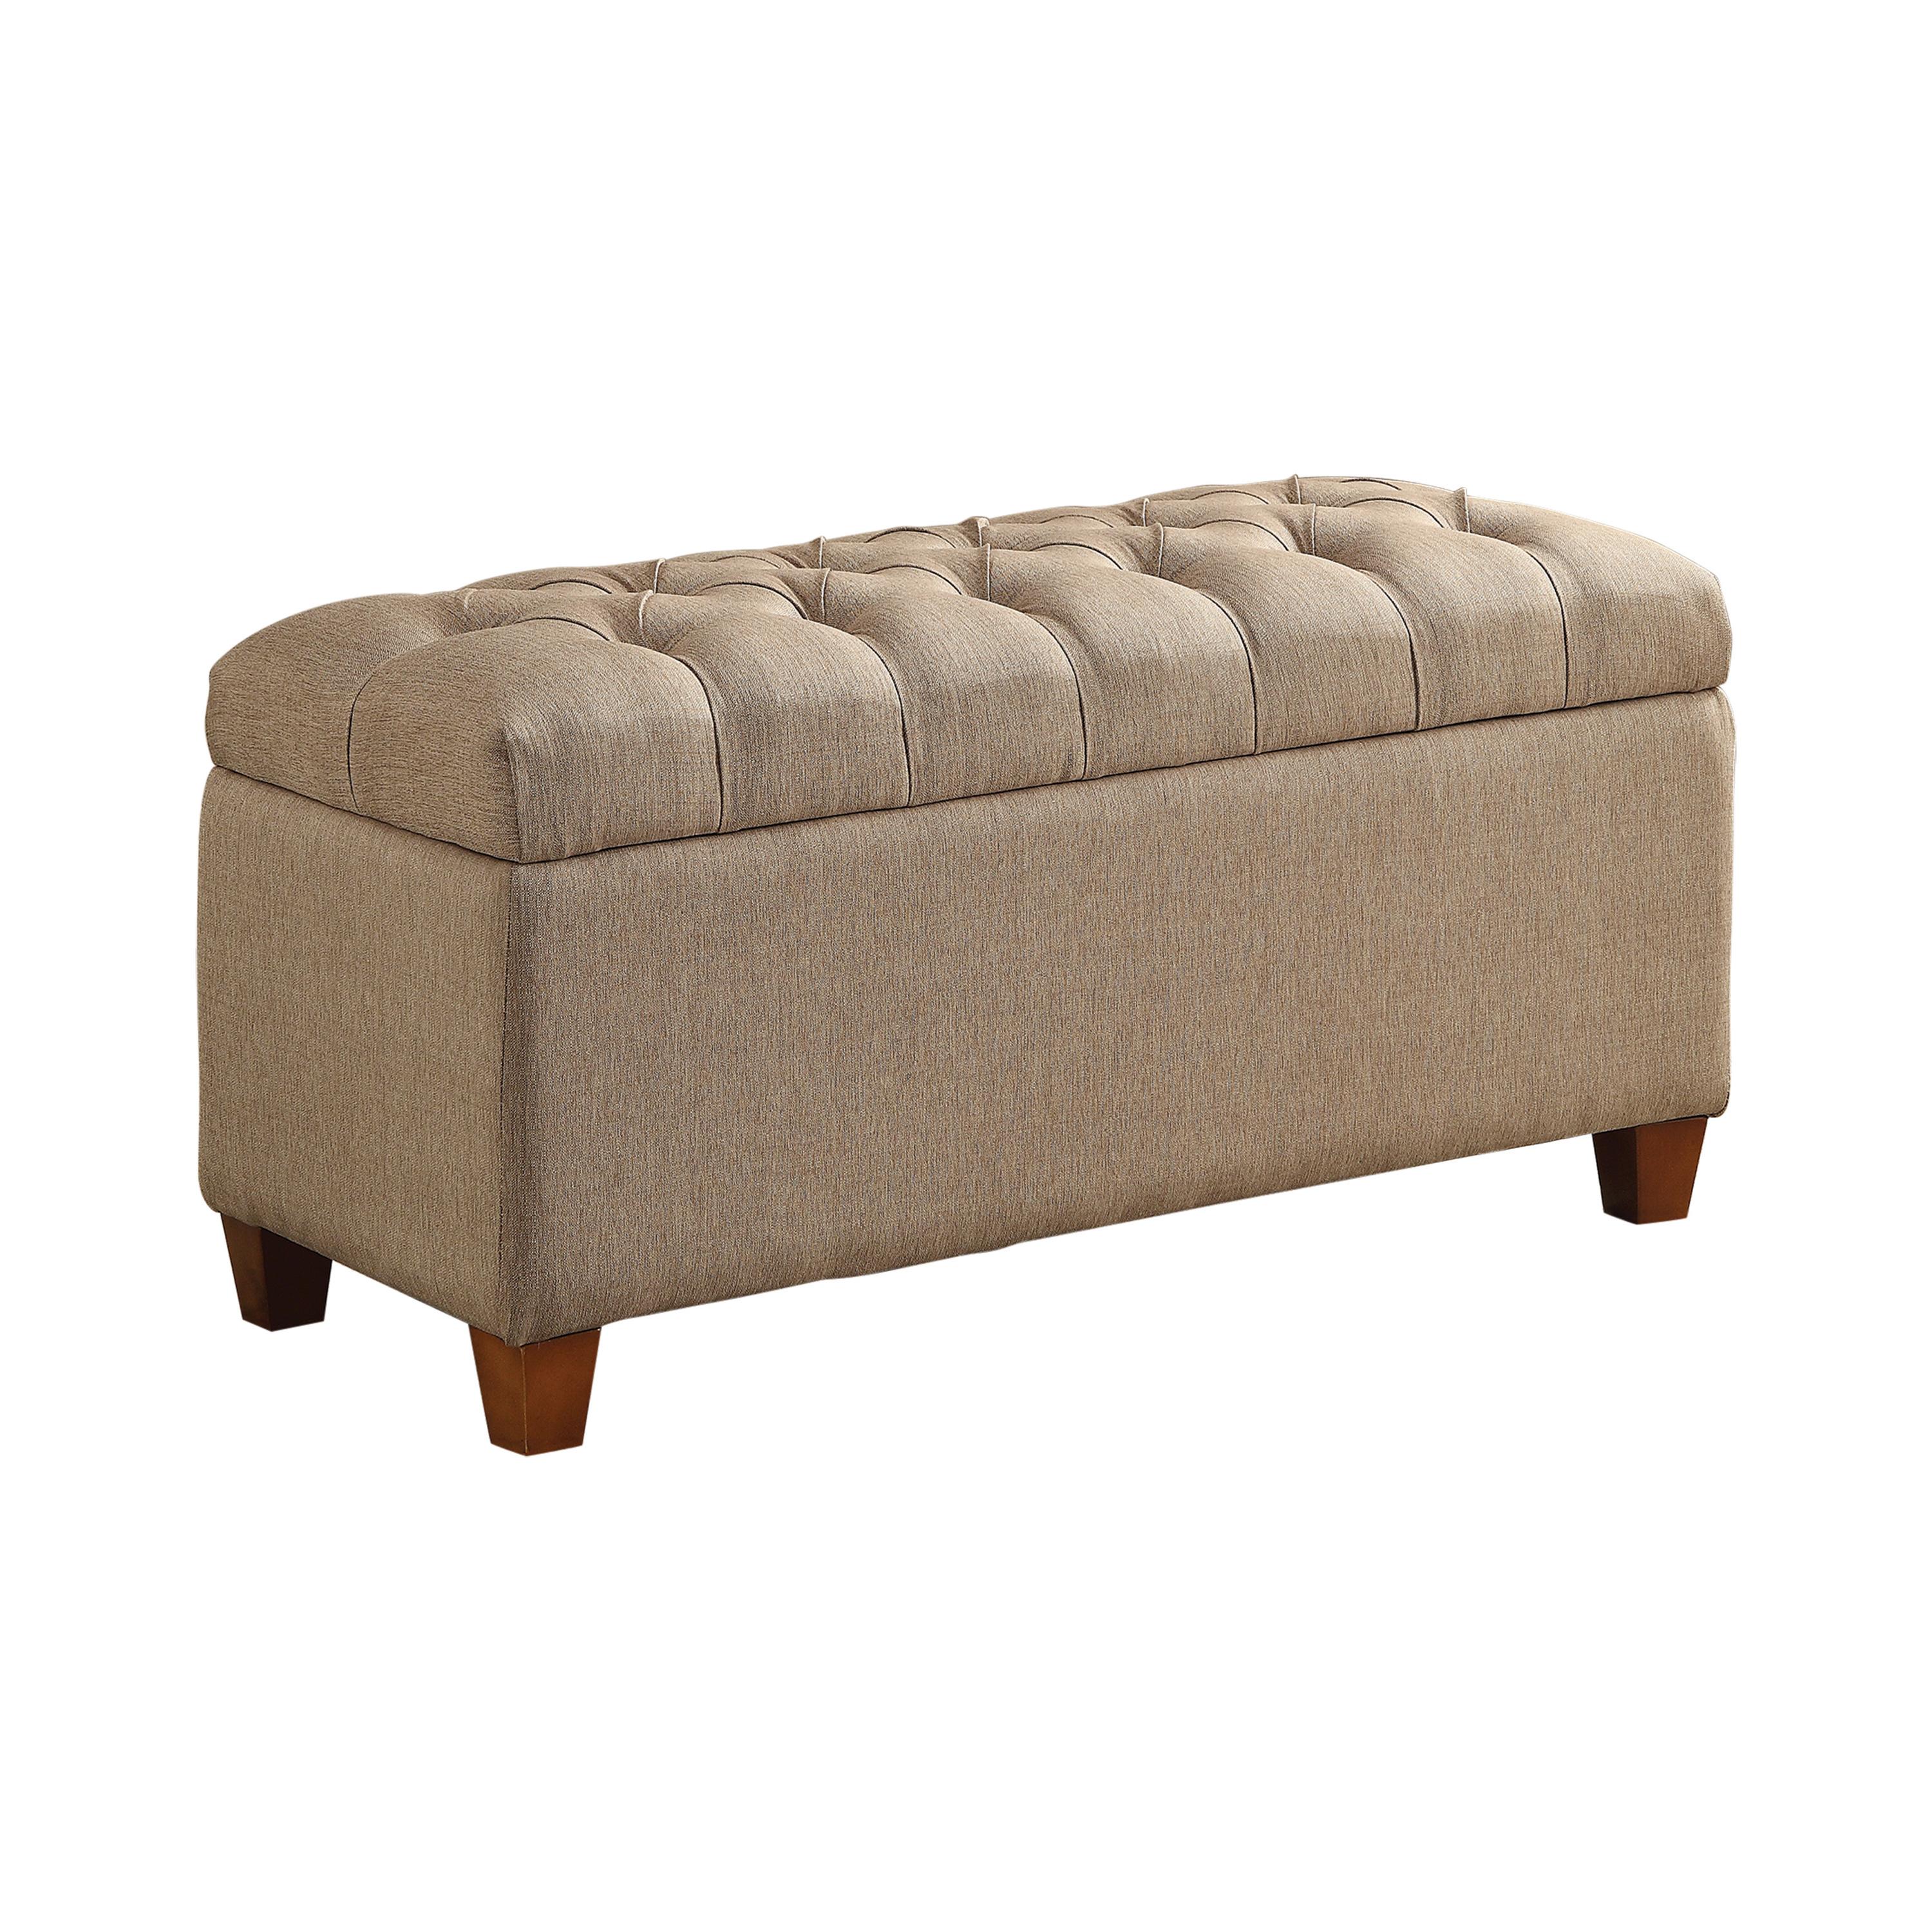 Classic Bench 500064 500064 in Taupe 